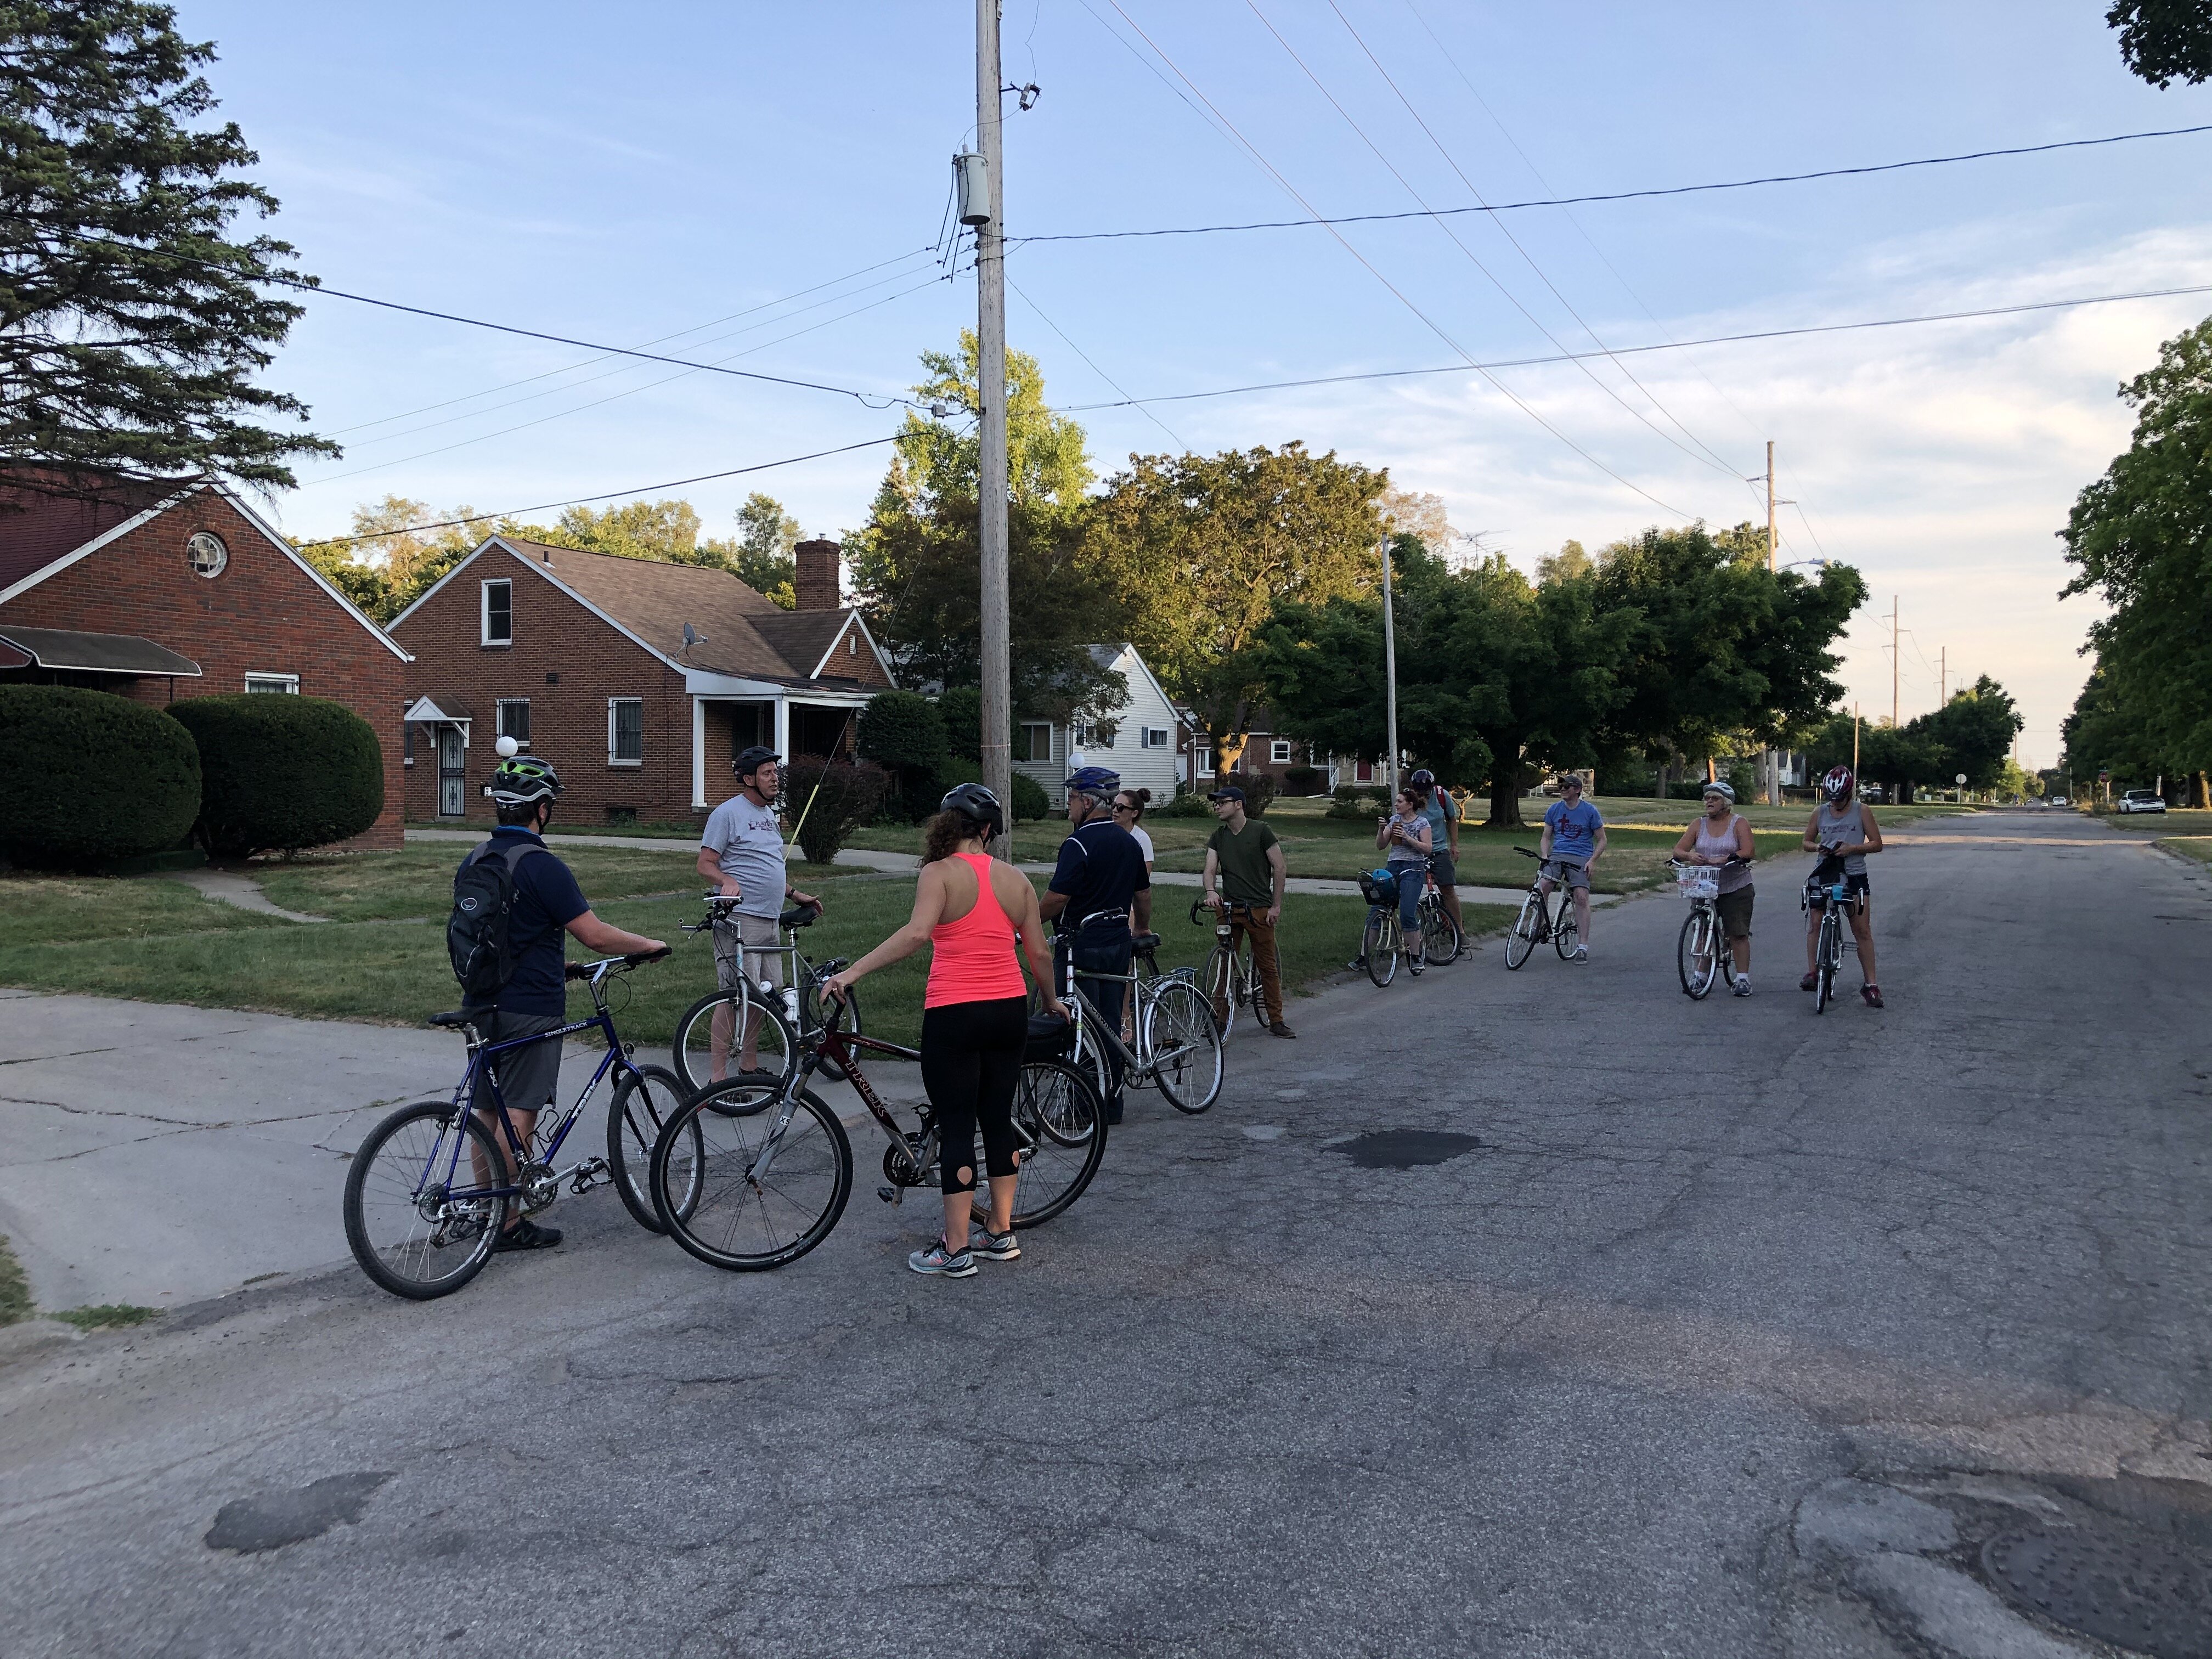 Thomas Henthorn discusses housing discrimination in Flint with participants on a Flint City Bike Tours tour in August.